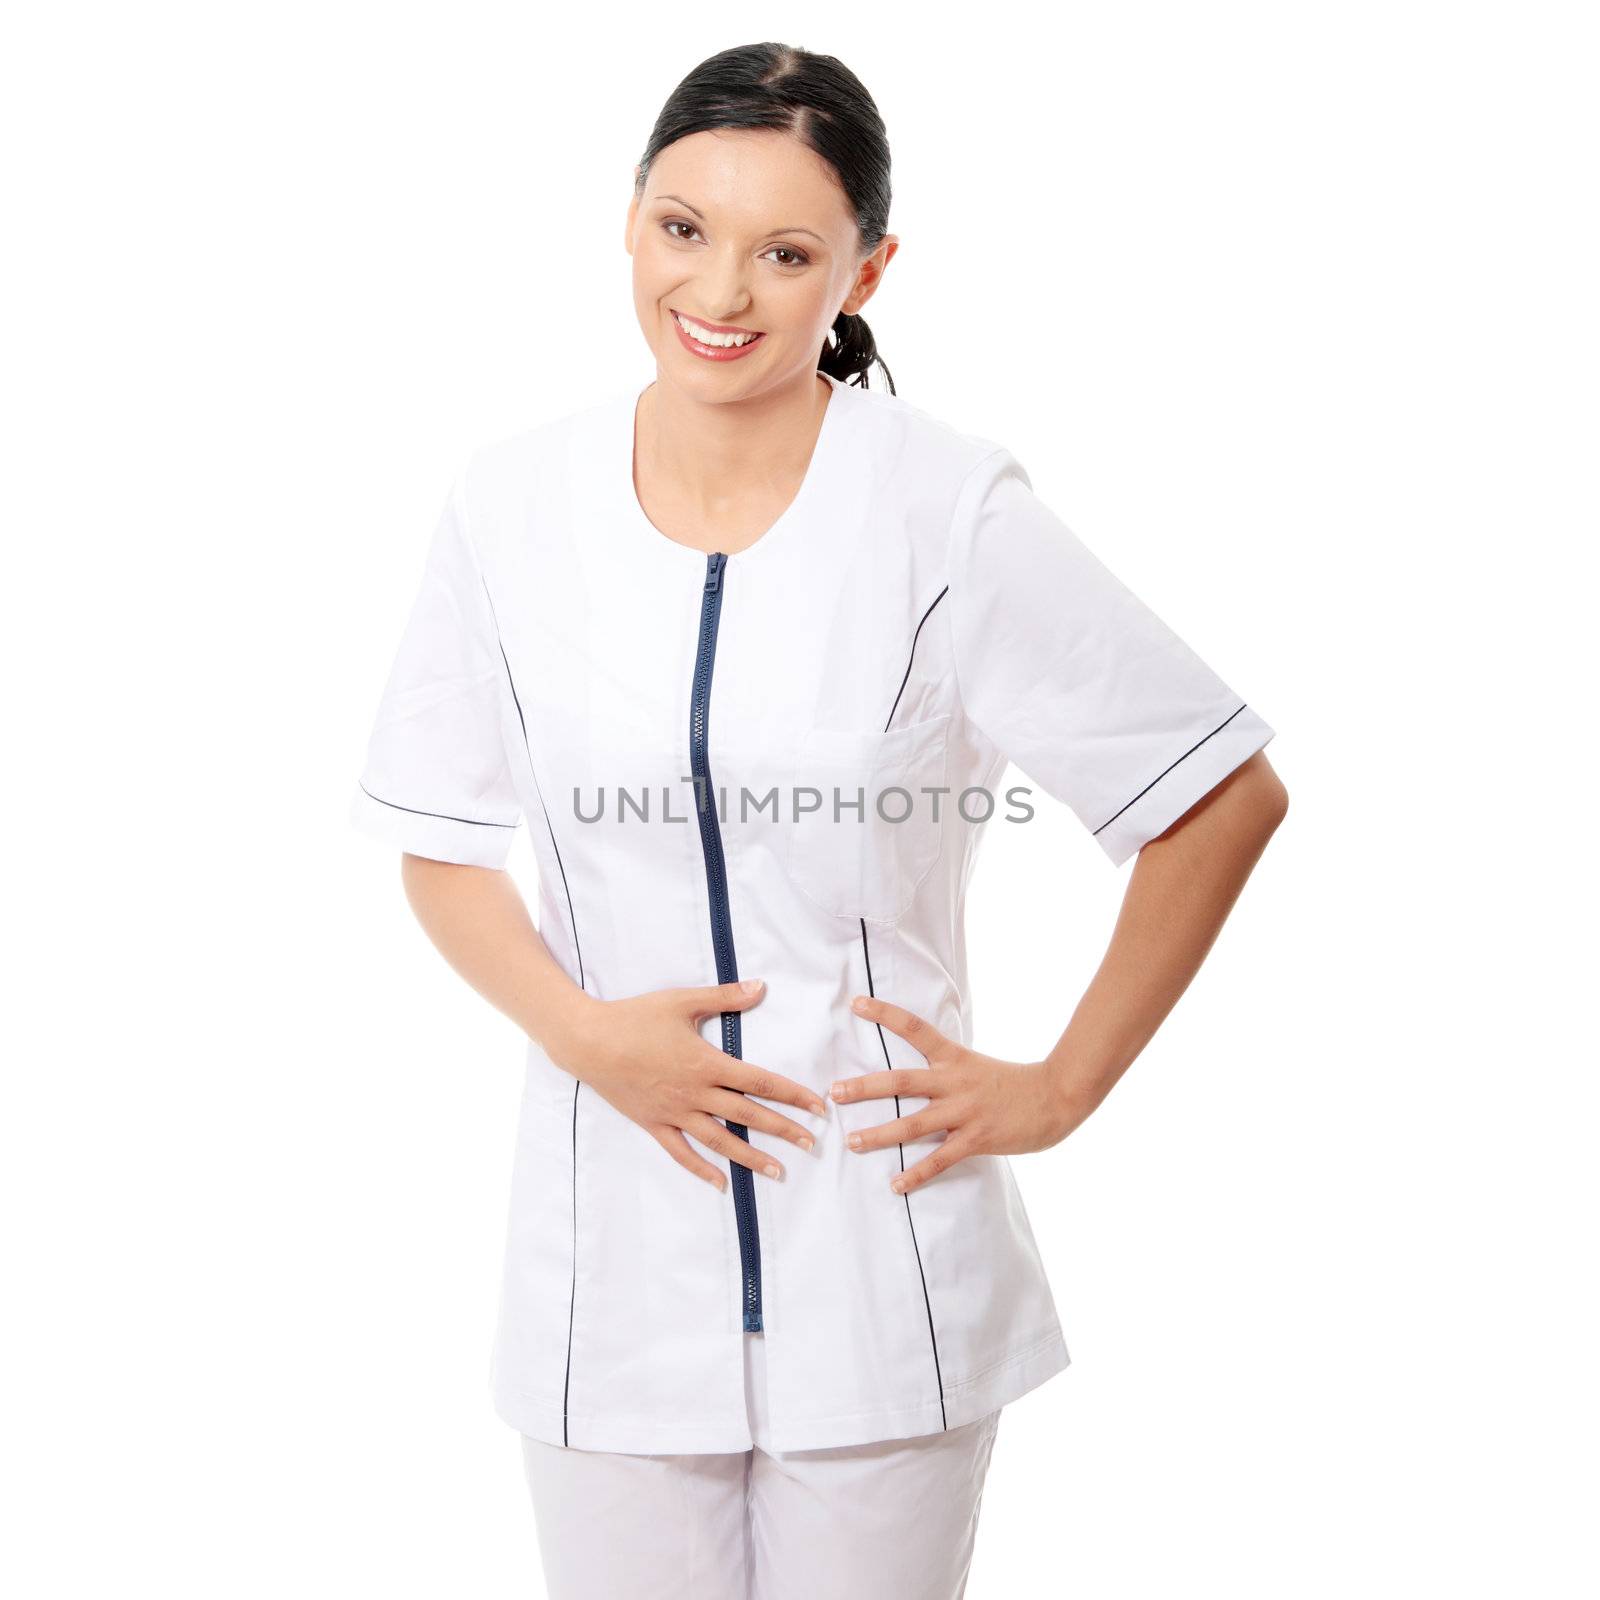 Smiling medical doctor or nurse. Isolated over white background